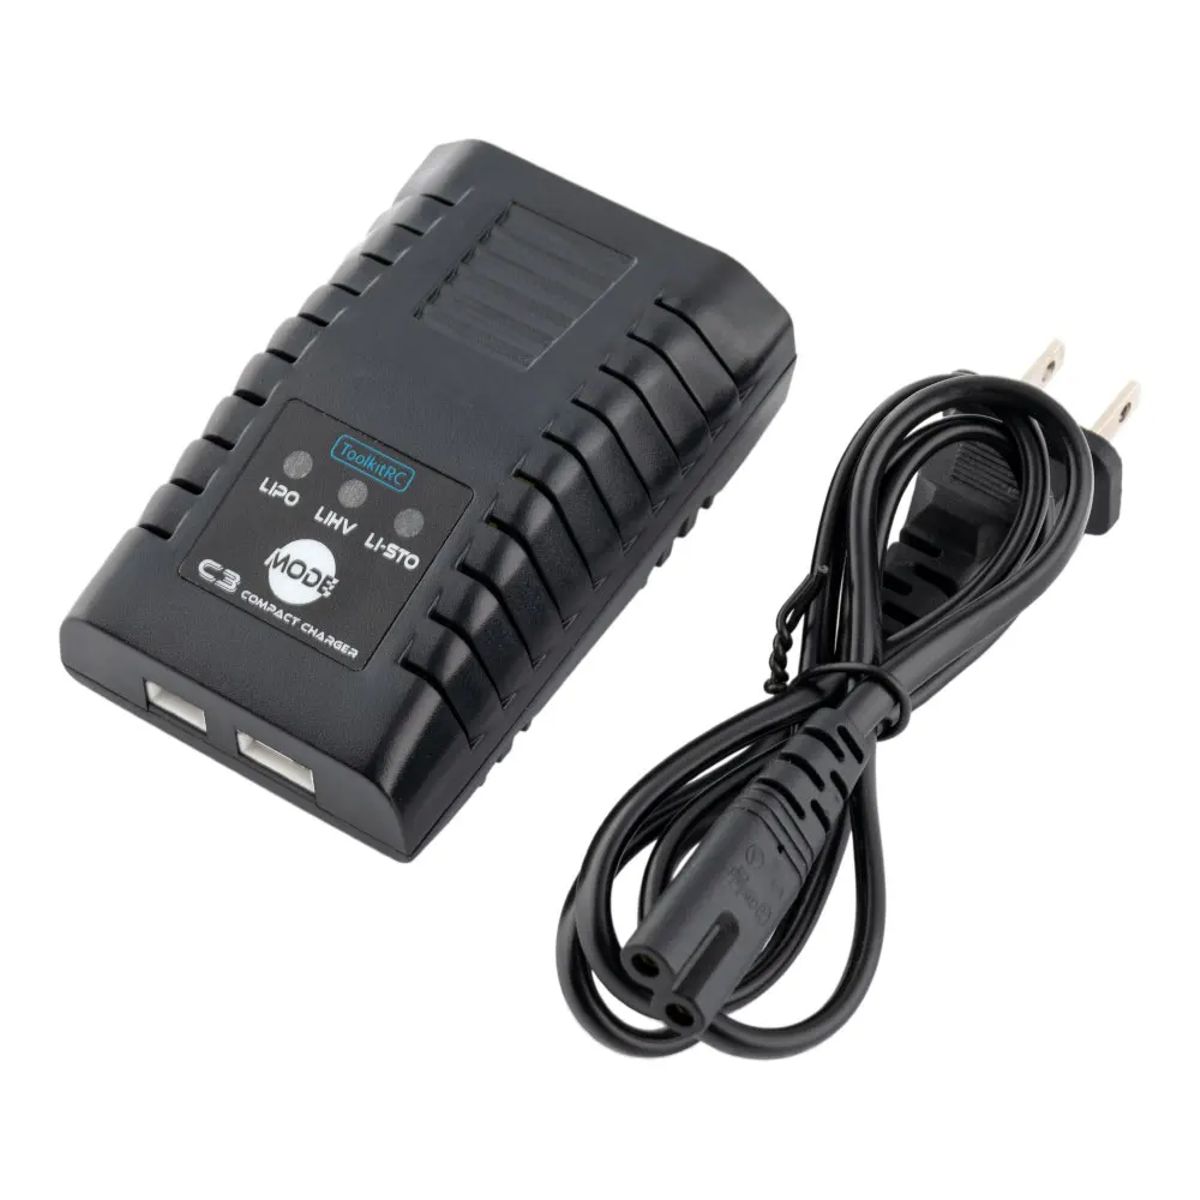   ToolkitRC C3 Compact charger